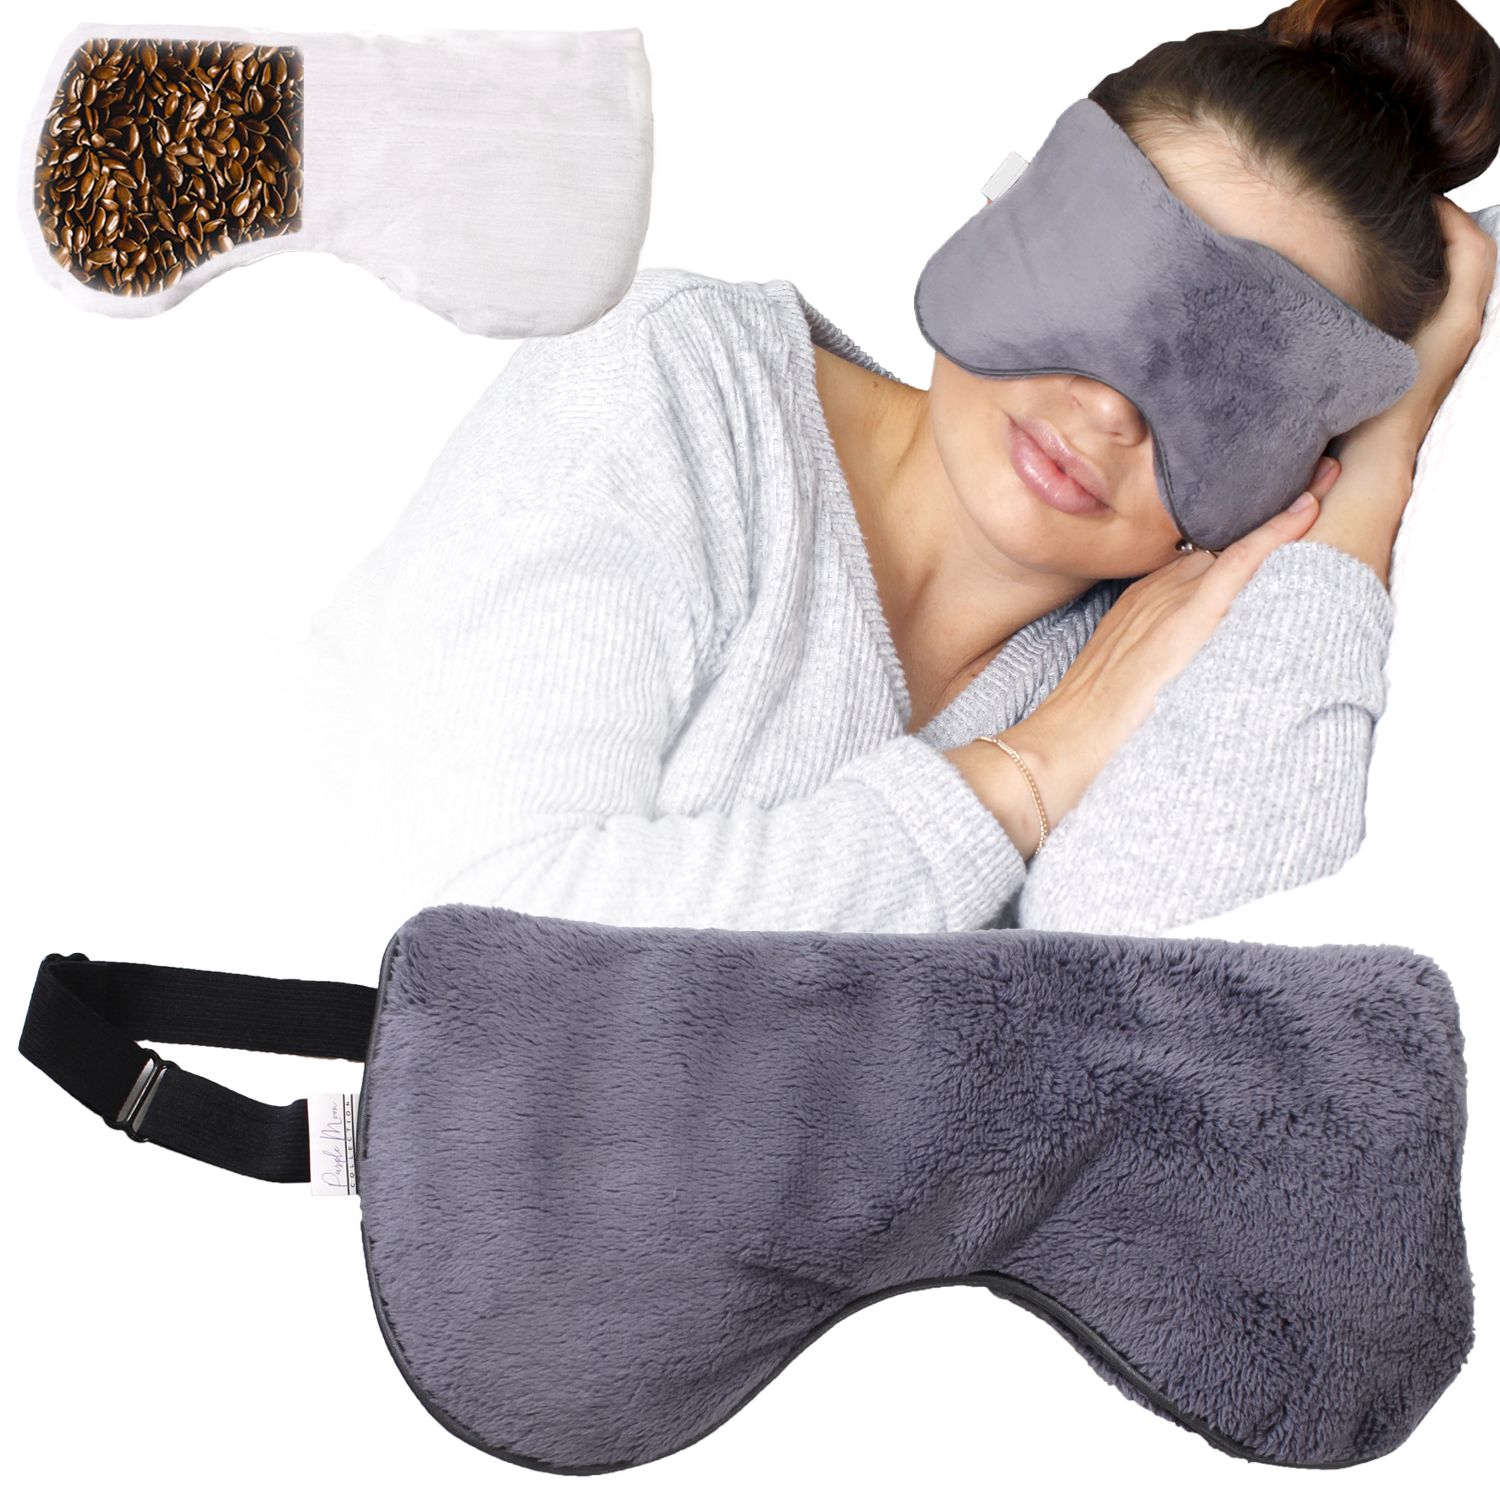 Dry Eyes Mask - Sleep Mask, Microwavable Moist Dry Therapy Ma – PurpleMoon Collection